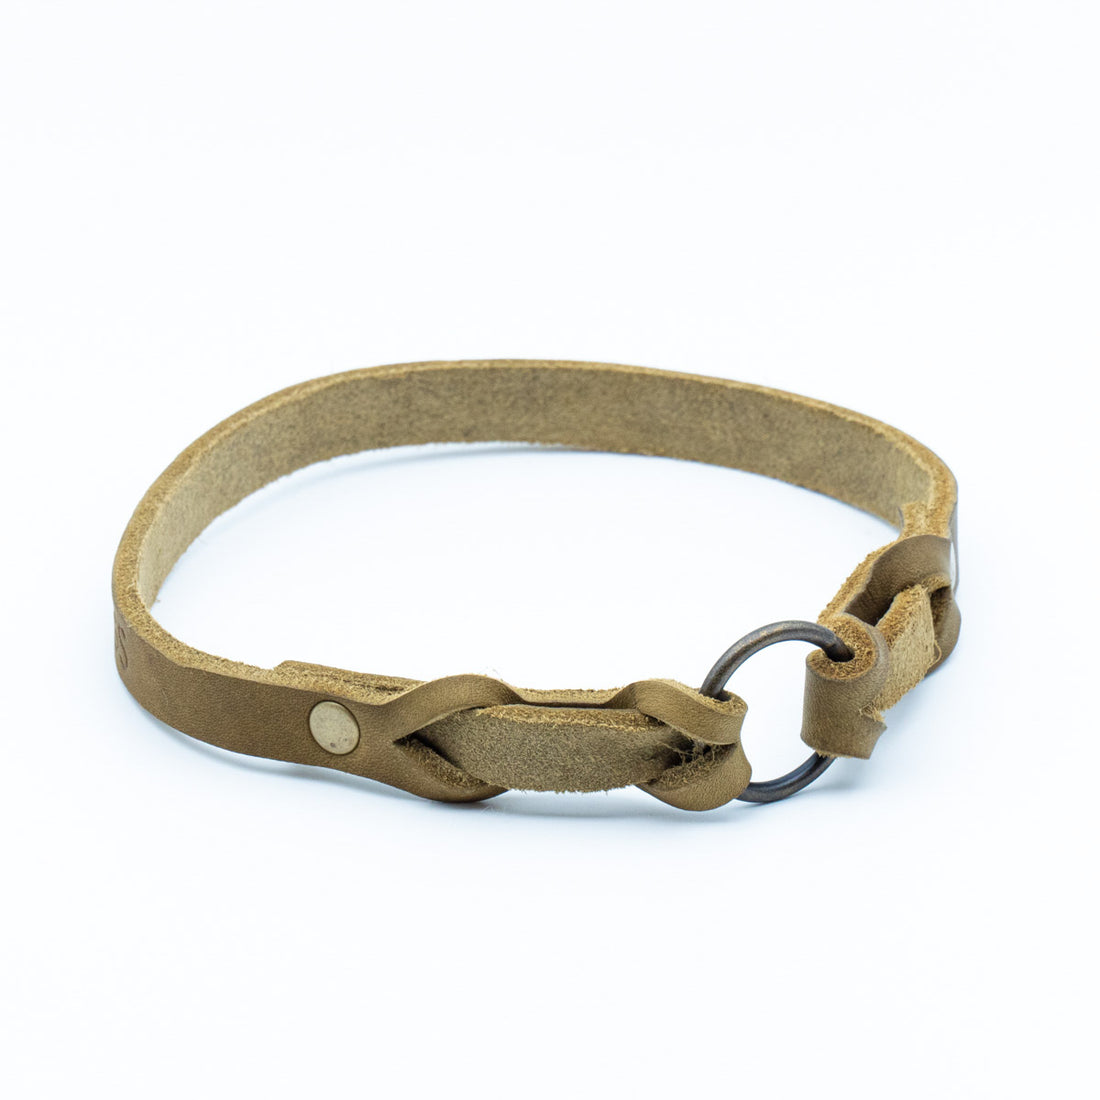 Dog tag strap - greased leather - olive